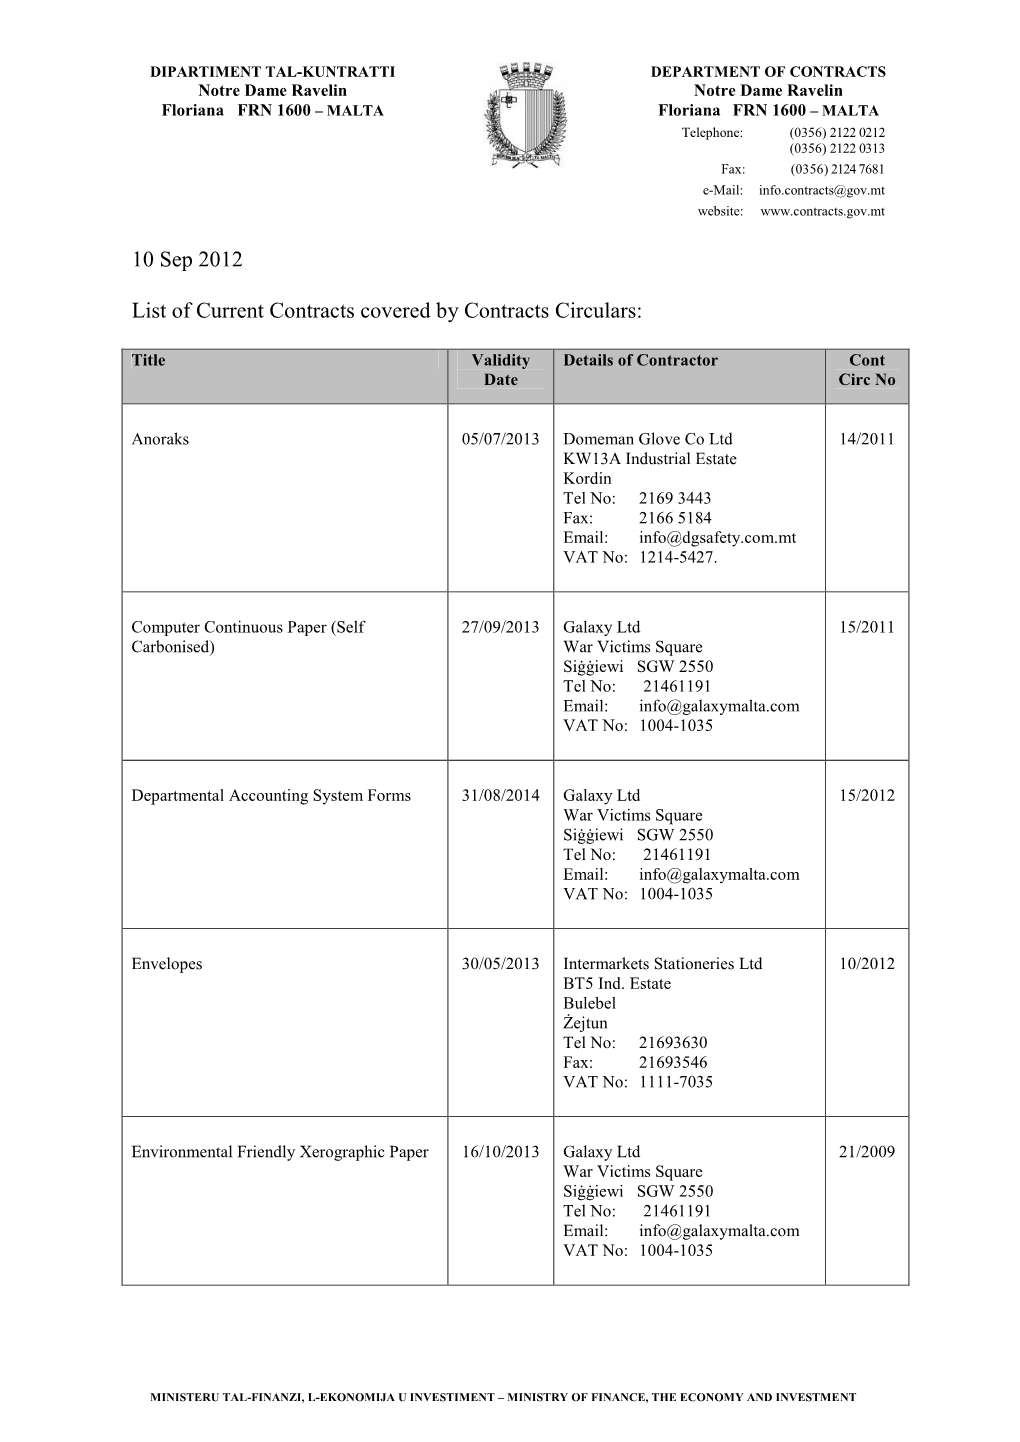 10 Sep 2012 List of Current Contracts Covered by Contracts Circulars